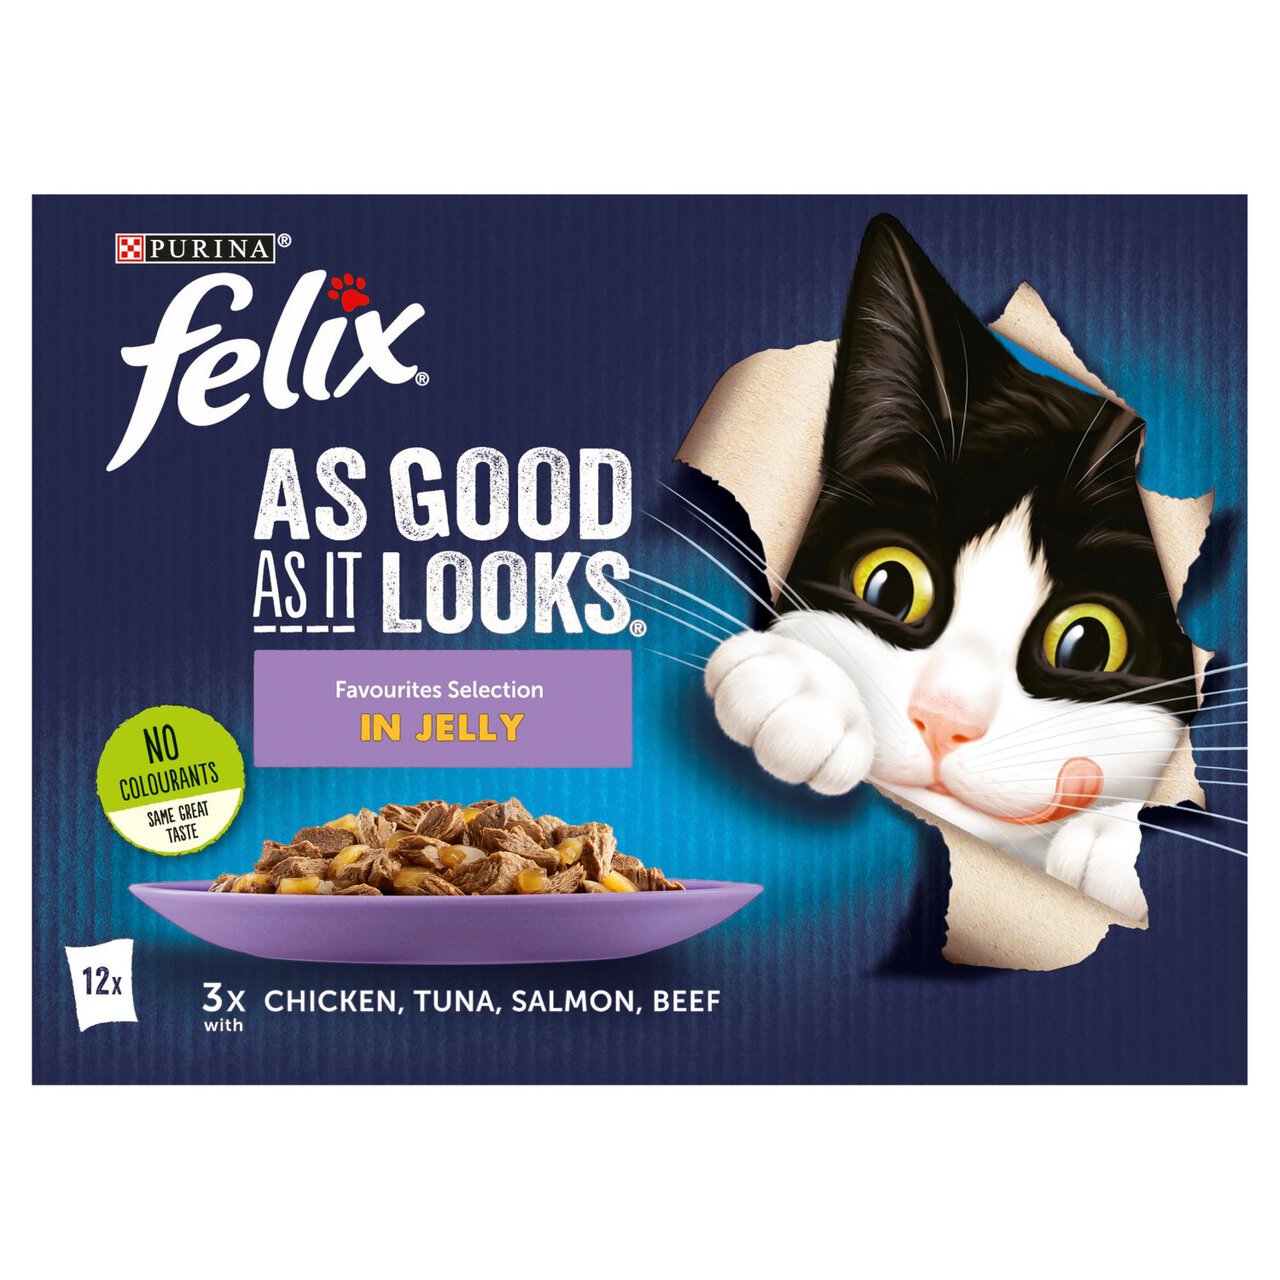 Felix As Good As It Looks Favourites Selection in Jelly 12 x 100g